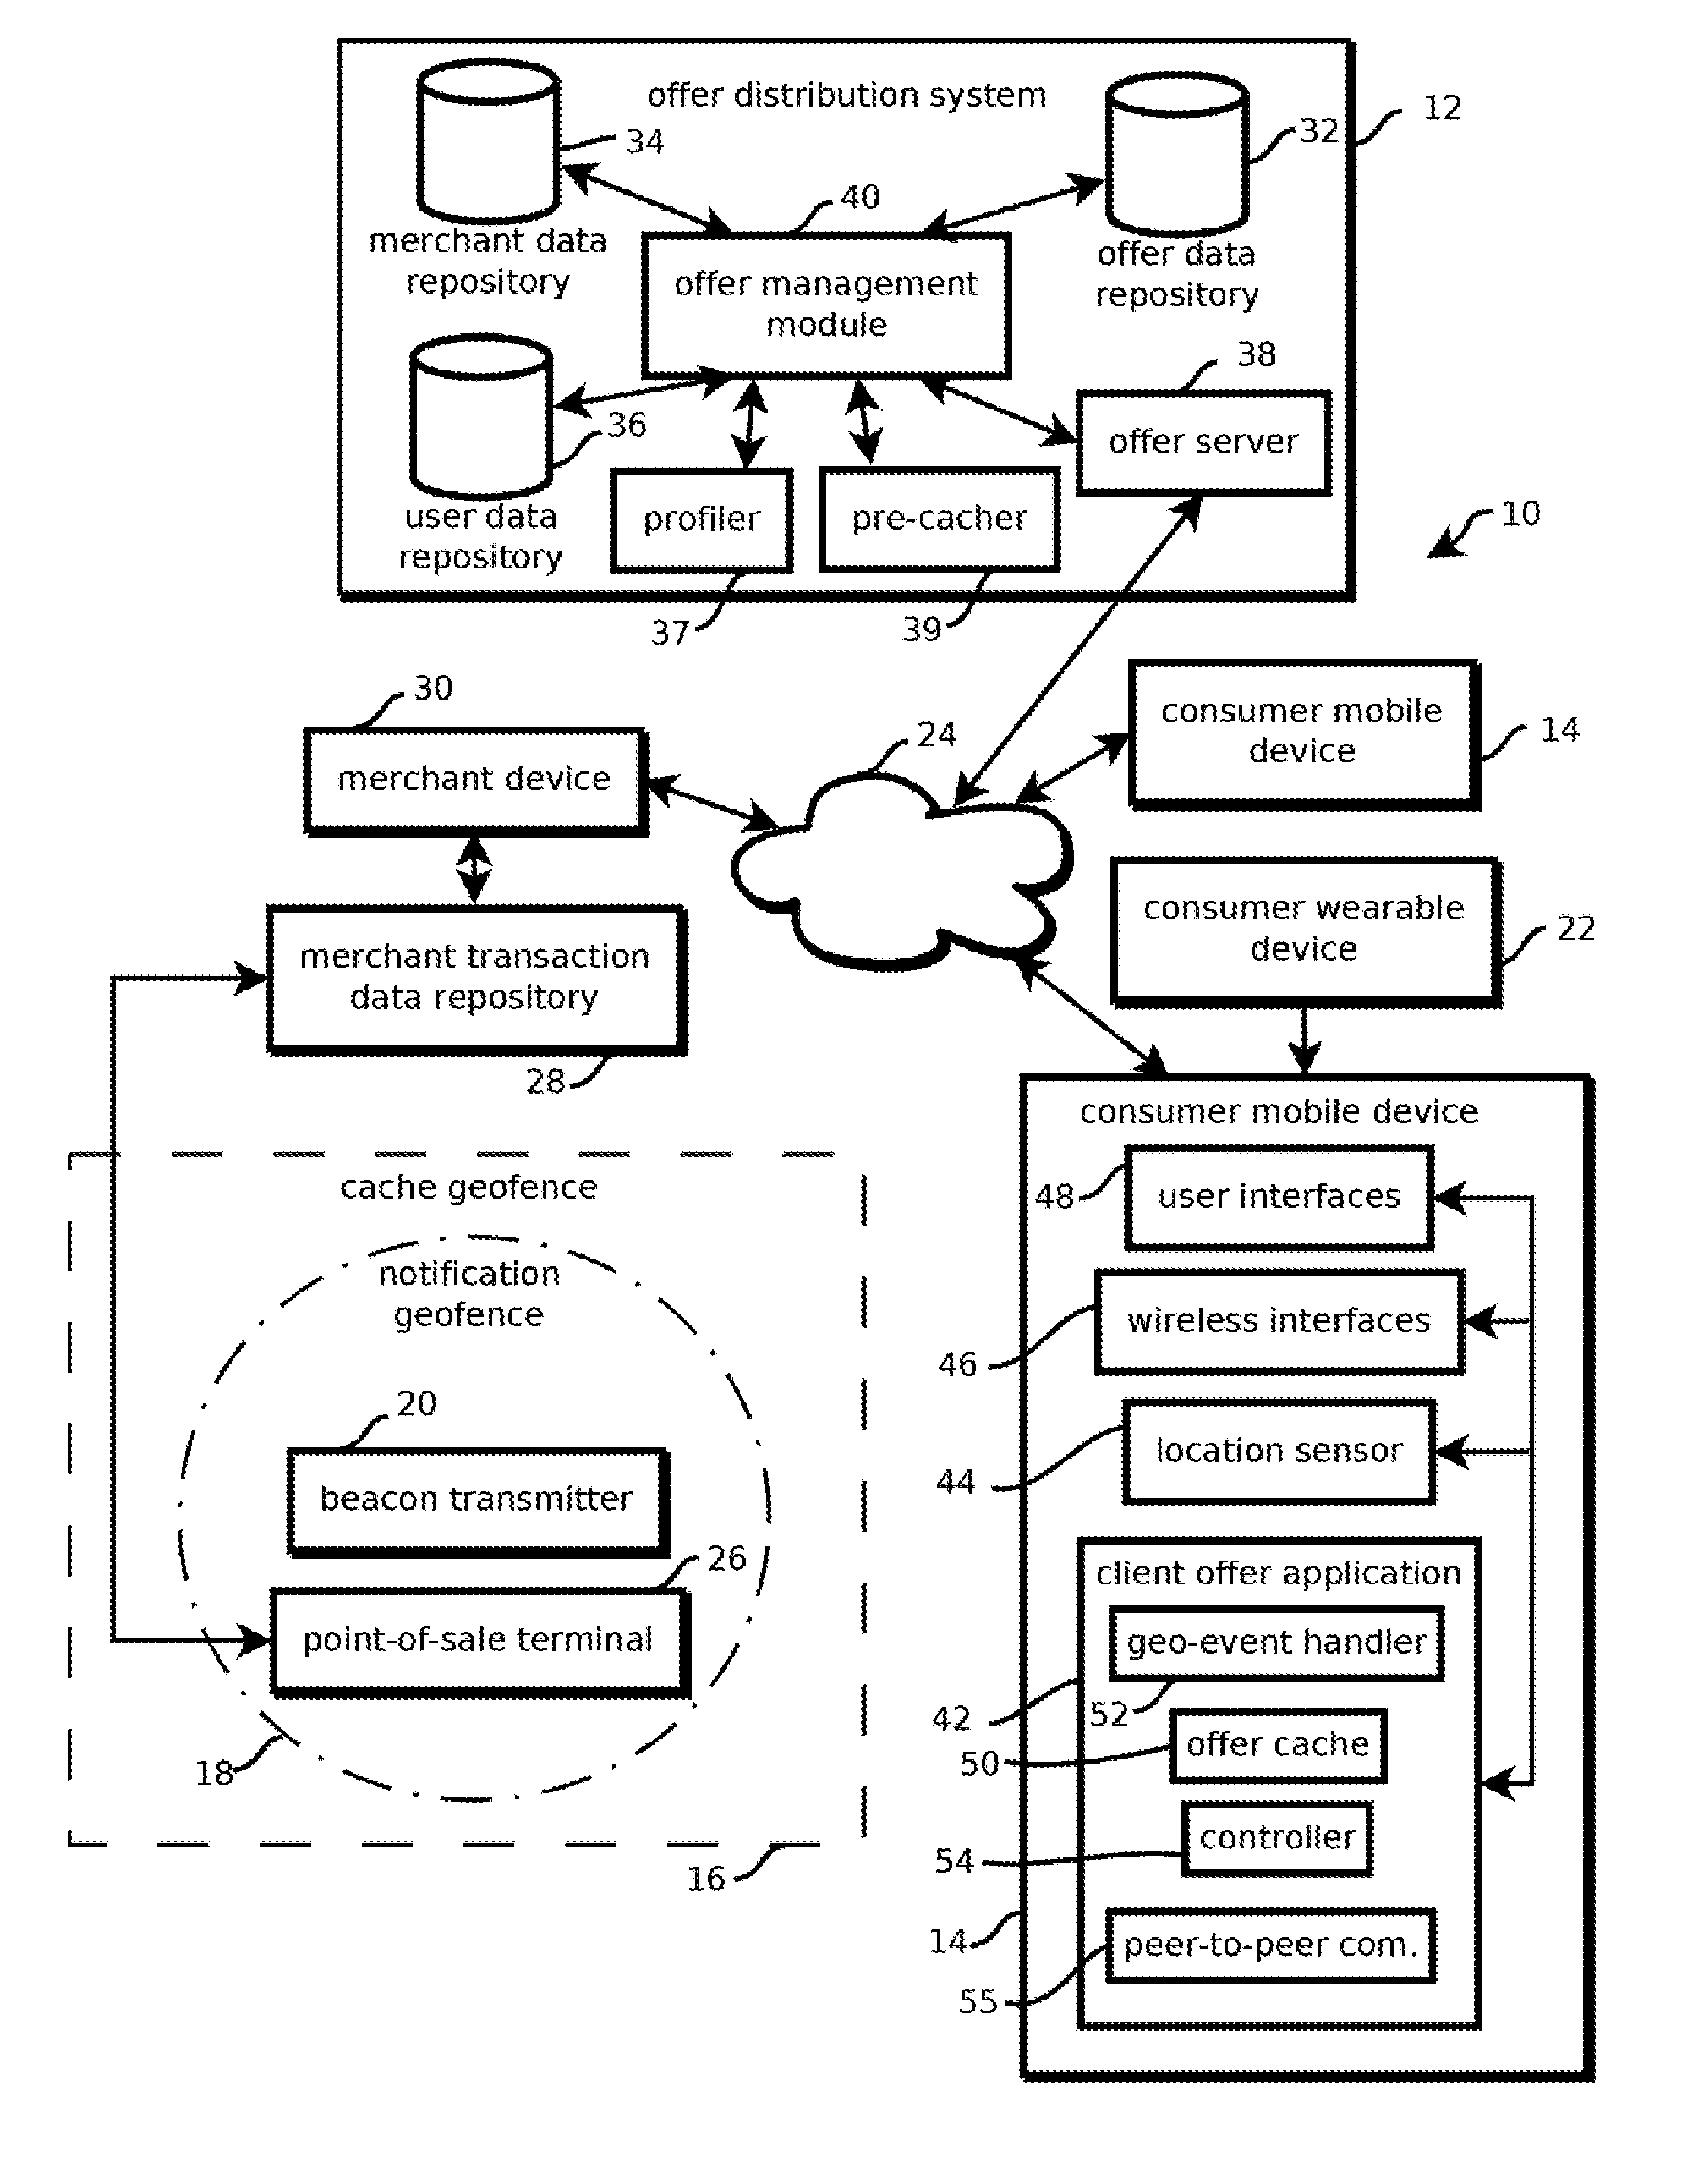 Peer-to-peer geotargeting content with ad-hoc mesh networks